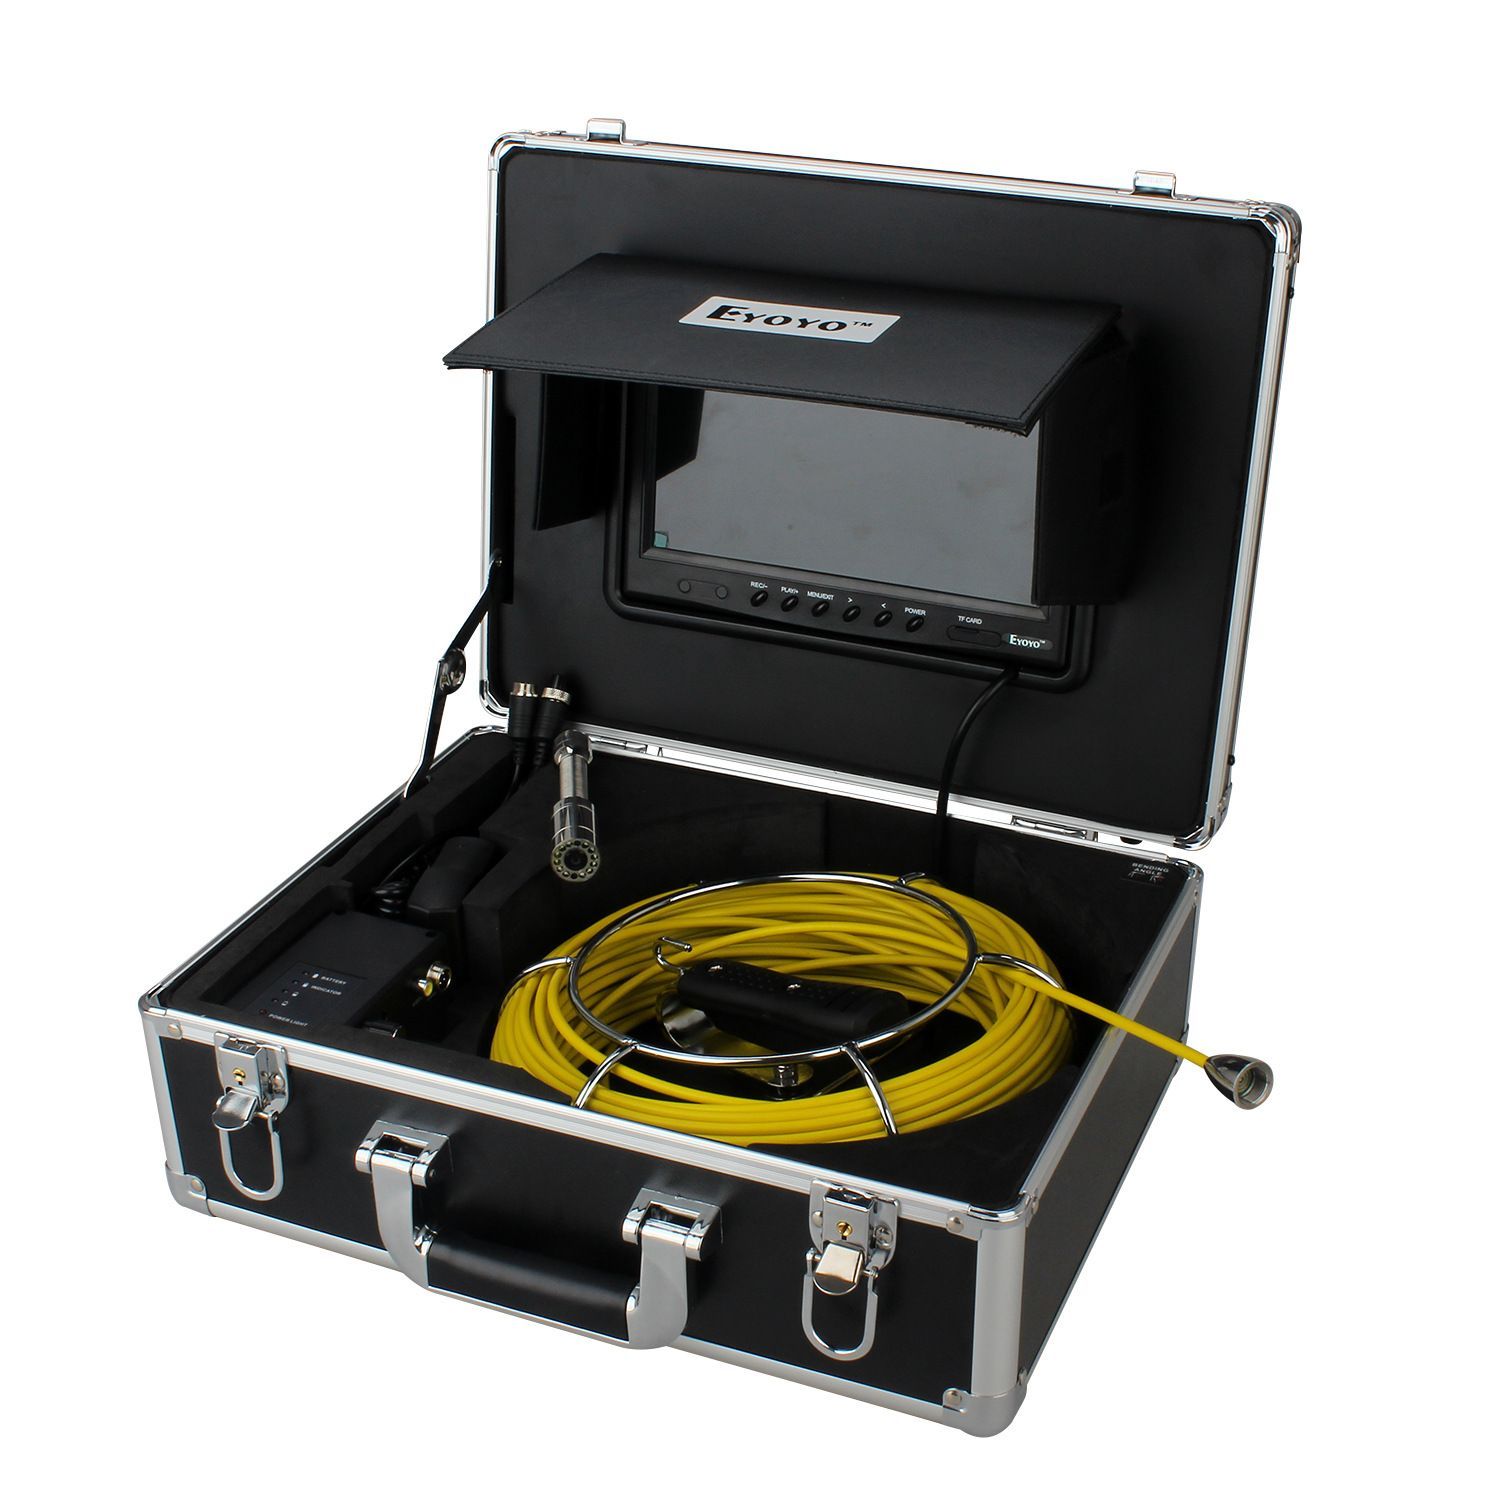 Eyoyo-WP90A-Pipe-Pipeline-Inspection-Camera-20M-Drain-Sewer-Industrial-Borescope-Video-Plumbing-Syst-1726639